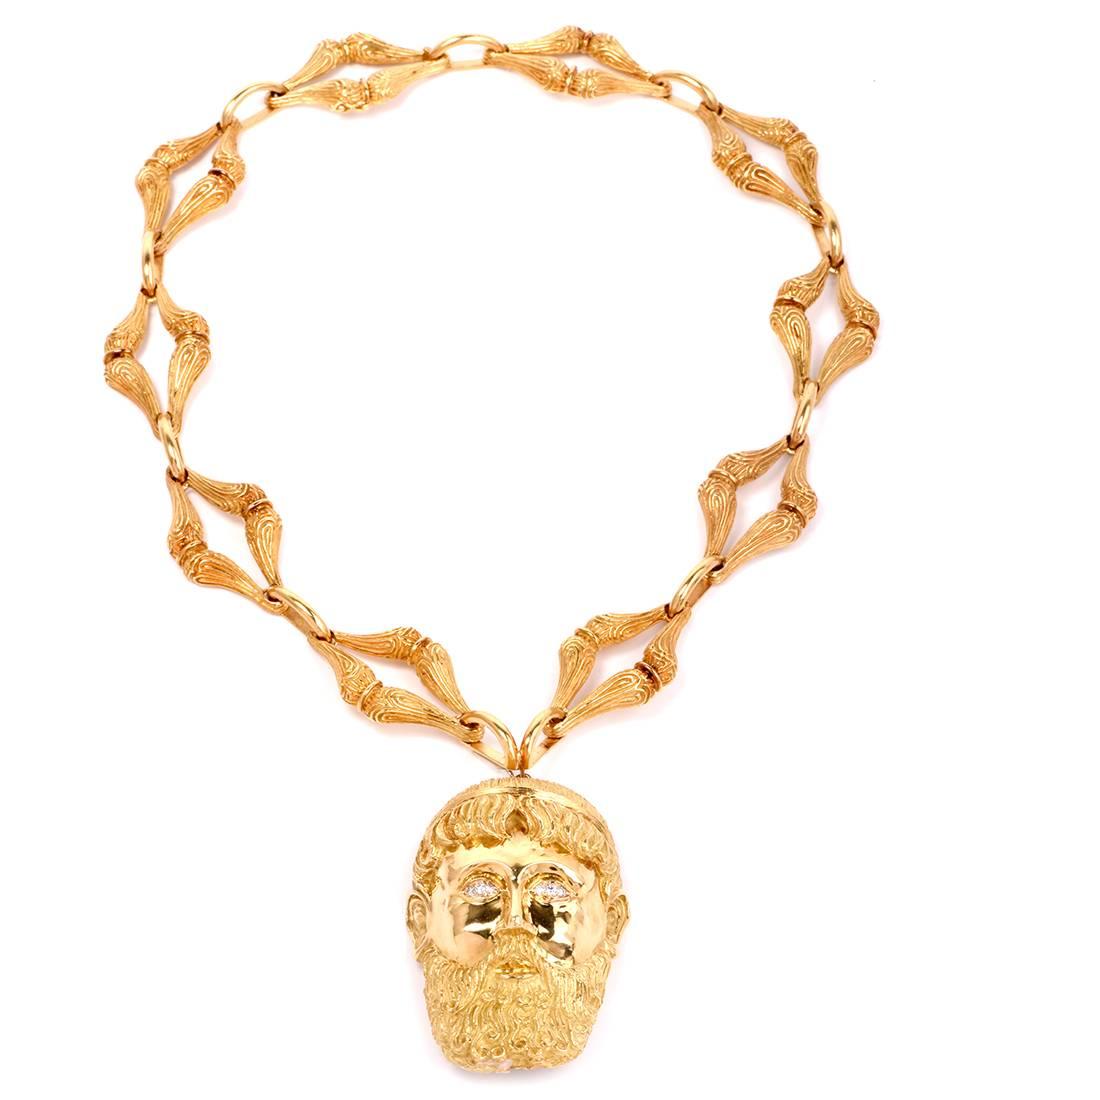 This one of a kind Henry Dunay captivating long necklace/pendant and bracelet of Greek inspiration crafted in solid 18K yellow gold.
The necklace incorporates a detachable head pendant rendered in polished gold and enriched with 6 genuine